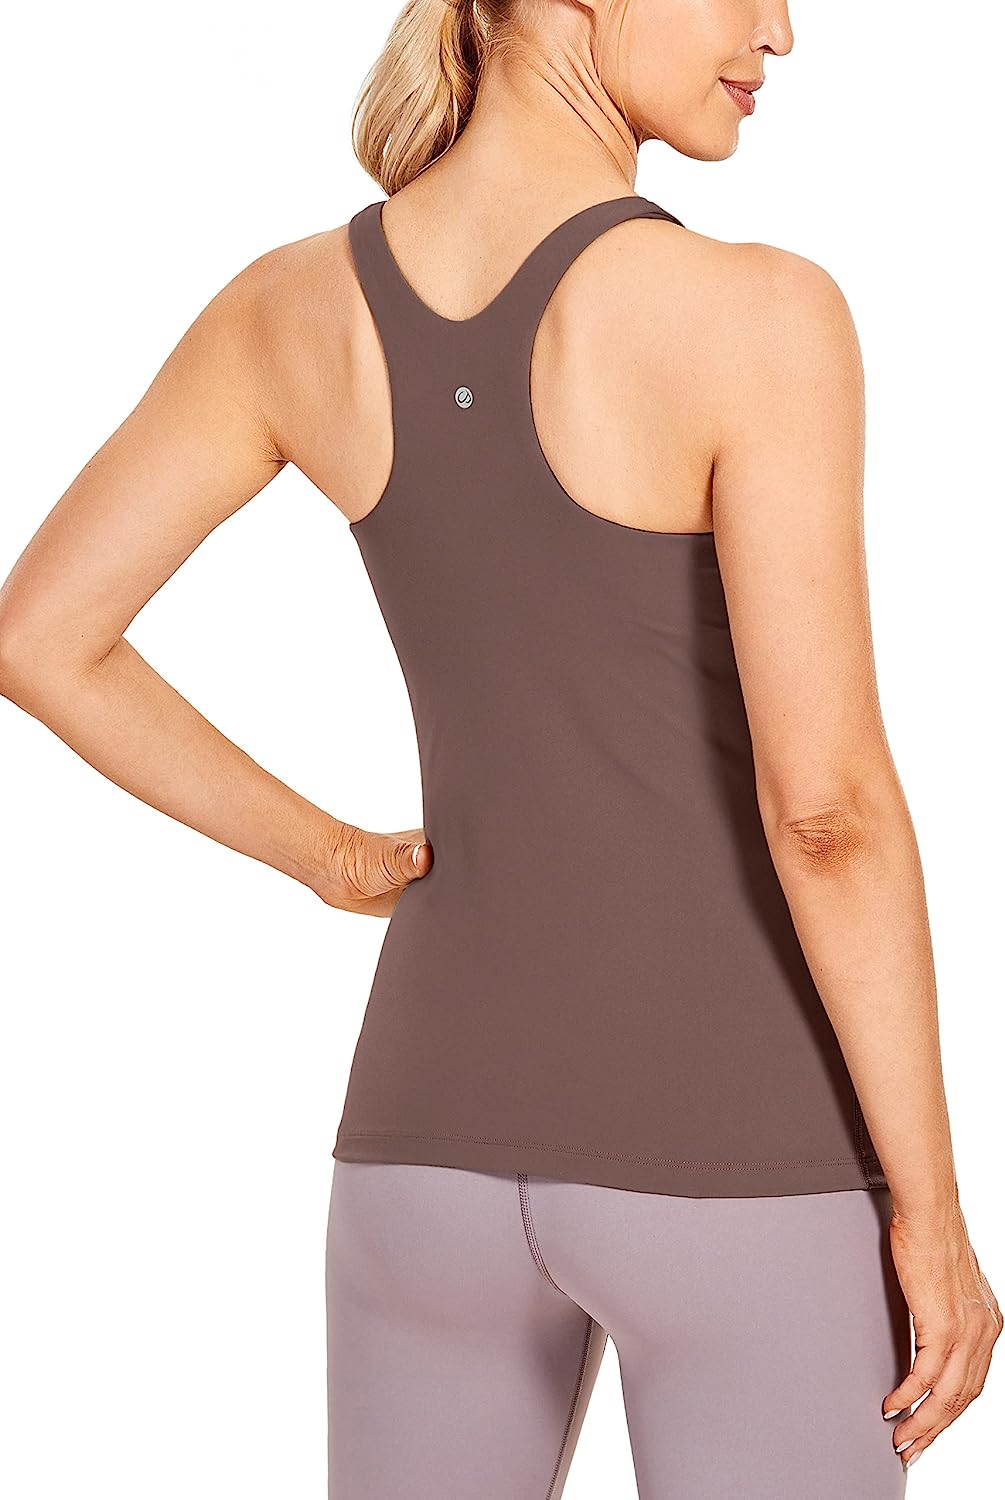 Buy CRZ YOGA Womens V Neck Workout Tank Tops with Built in Bras